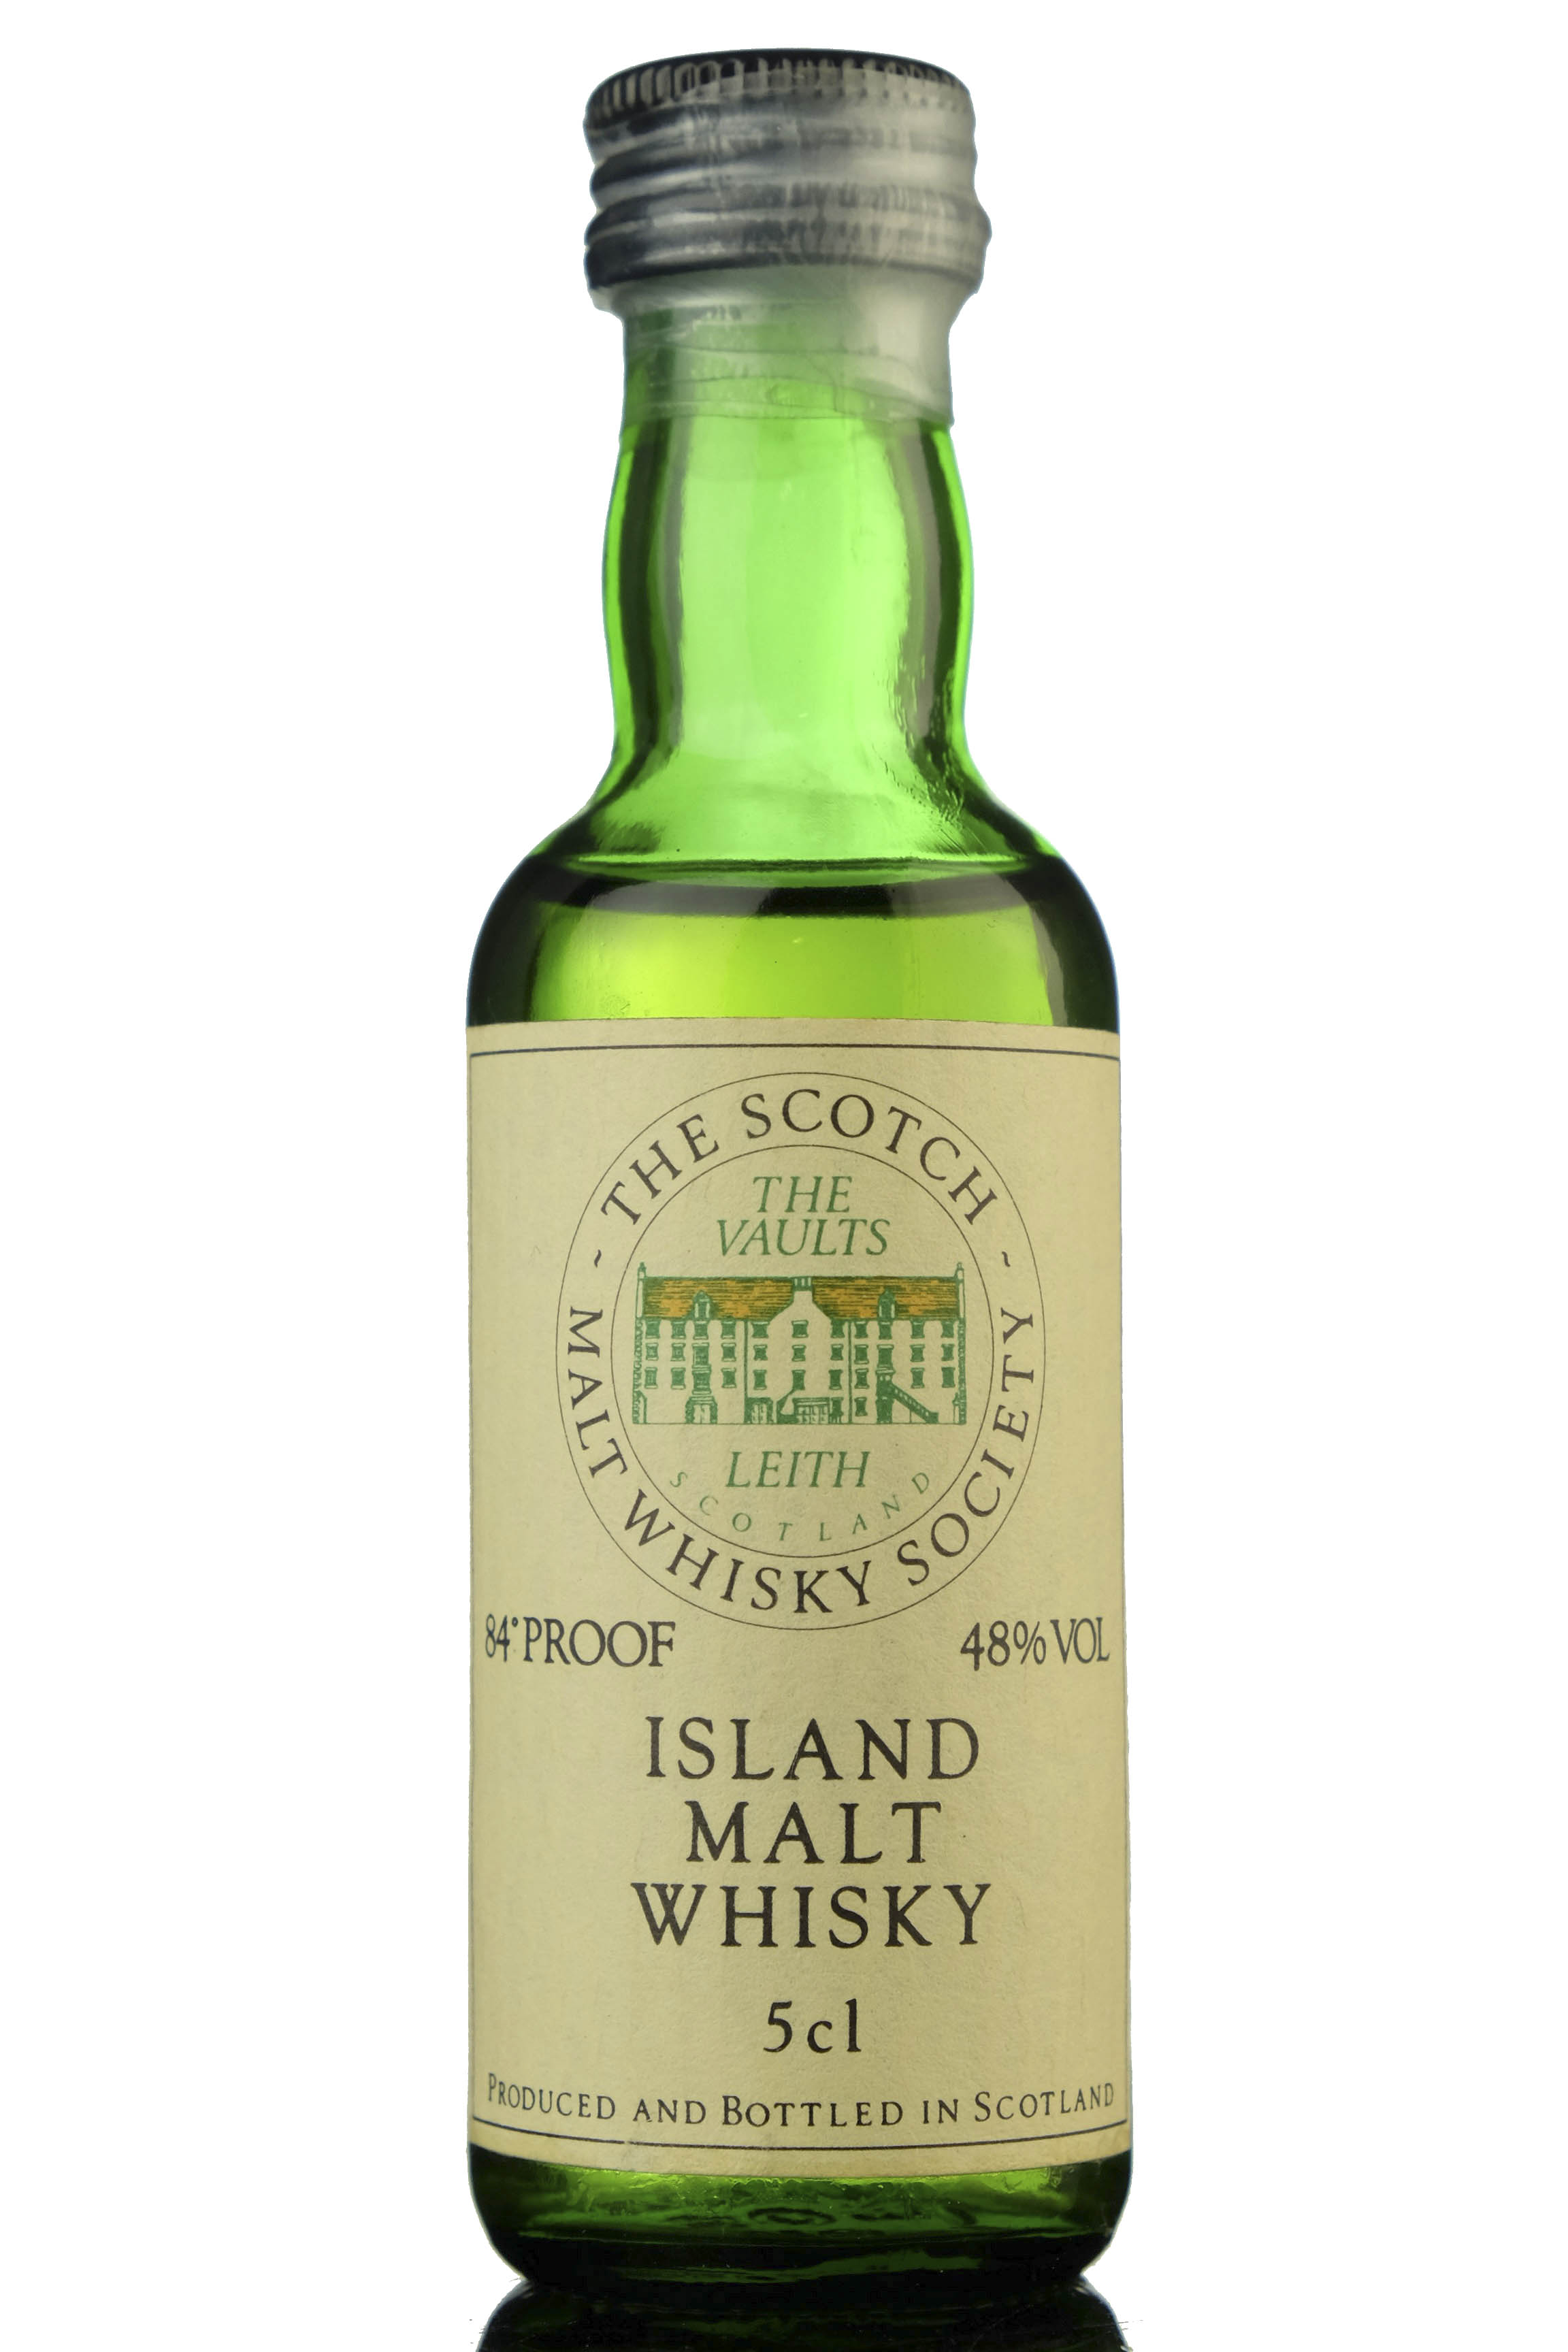 Bowmore 1974 - 13 Year Old - SMWS 3.8 Miniature